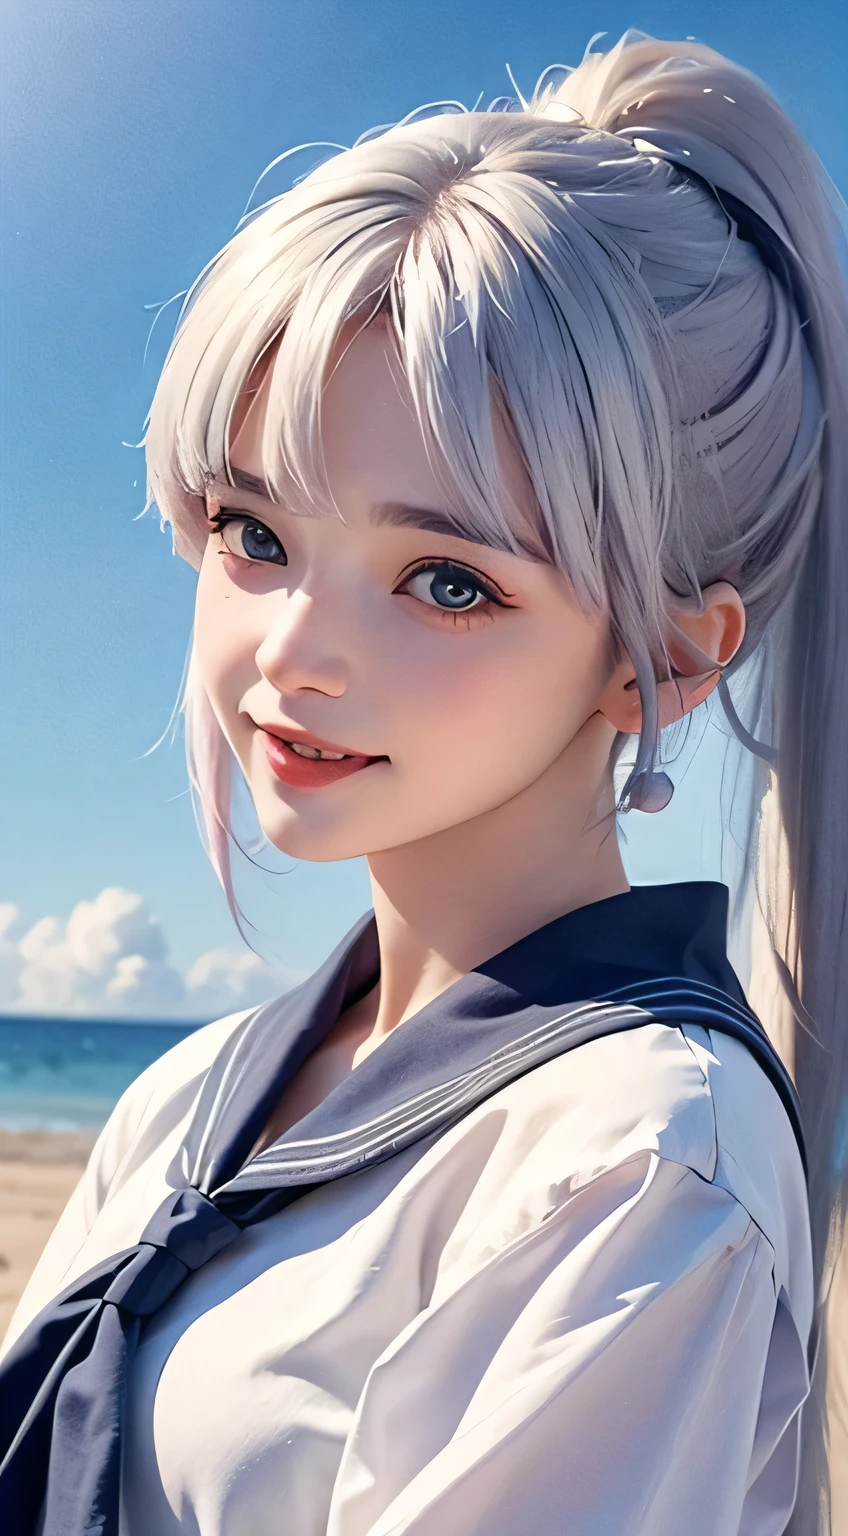 Best quality at best，tmasterpiece，Extremely Delicately Beautiful，The content is very detailed，CG，gatherings，8k wallpaper，An Astonishing，depth of fields，1 Chinese girl，very beautiful look，delicate skin，Flawless Face，plain face，white color hair，Long white hair，high ponytails，There are two strands of white hair on both sides of the ears，Wear pink hair accessories，Eye color is sky blue，Elaborate Eyes，Eyes sparkle，grin face, Put on a sailor suit、medium  、Have by the sea、(On the beach)、  light, realistically, tmasterpiece, Best quality, Complex CG, The face is very detailed, high detail eyeull bodyesbian locked，Full body lesbian